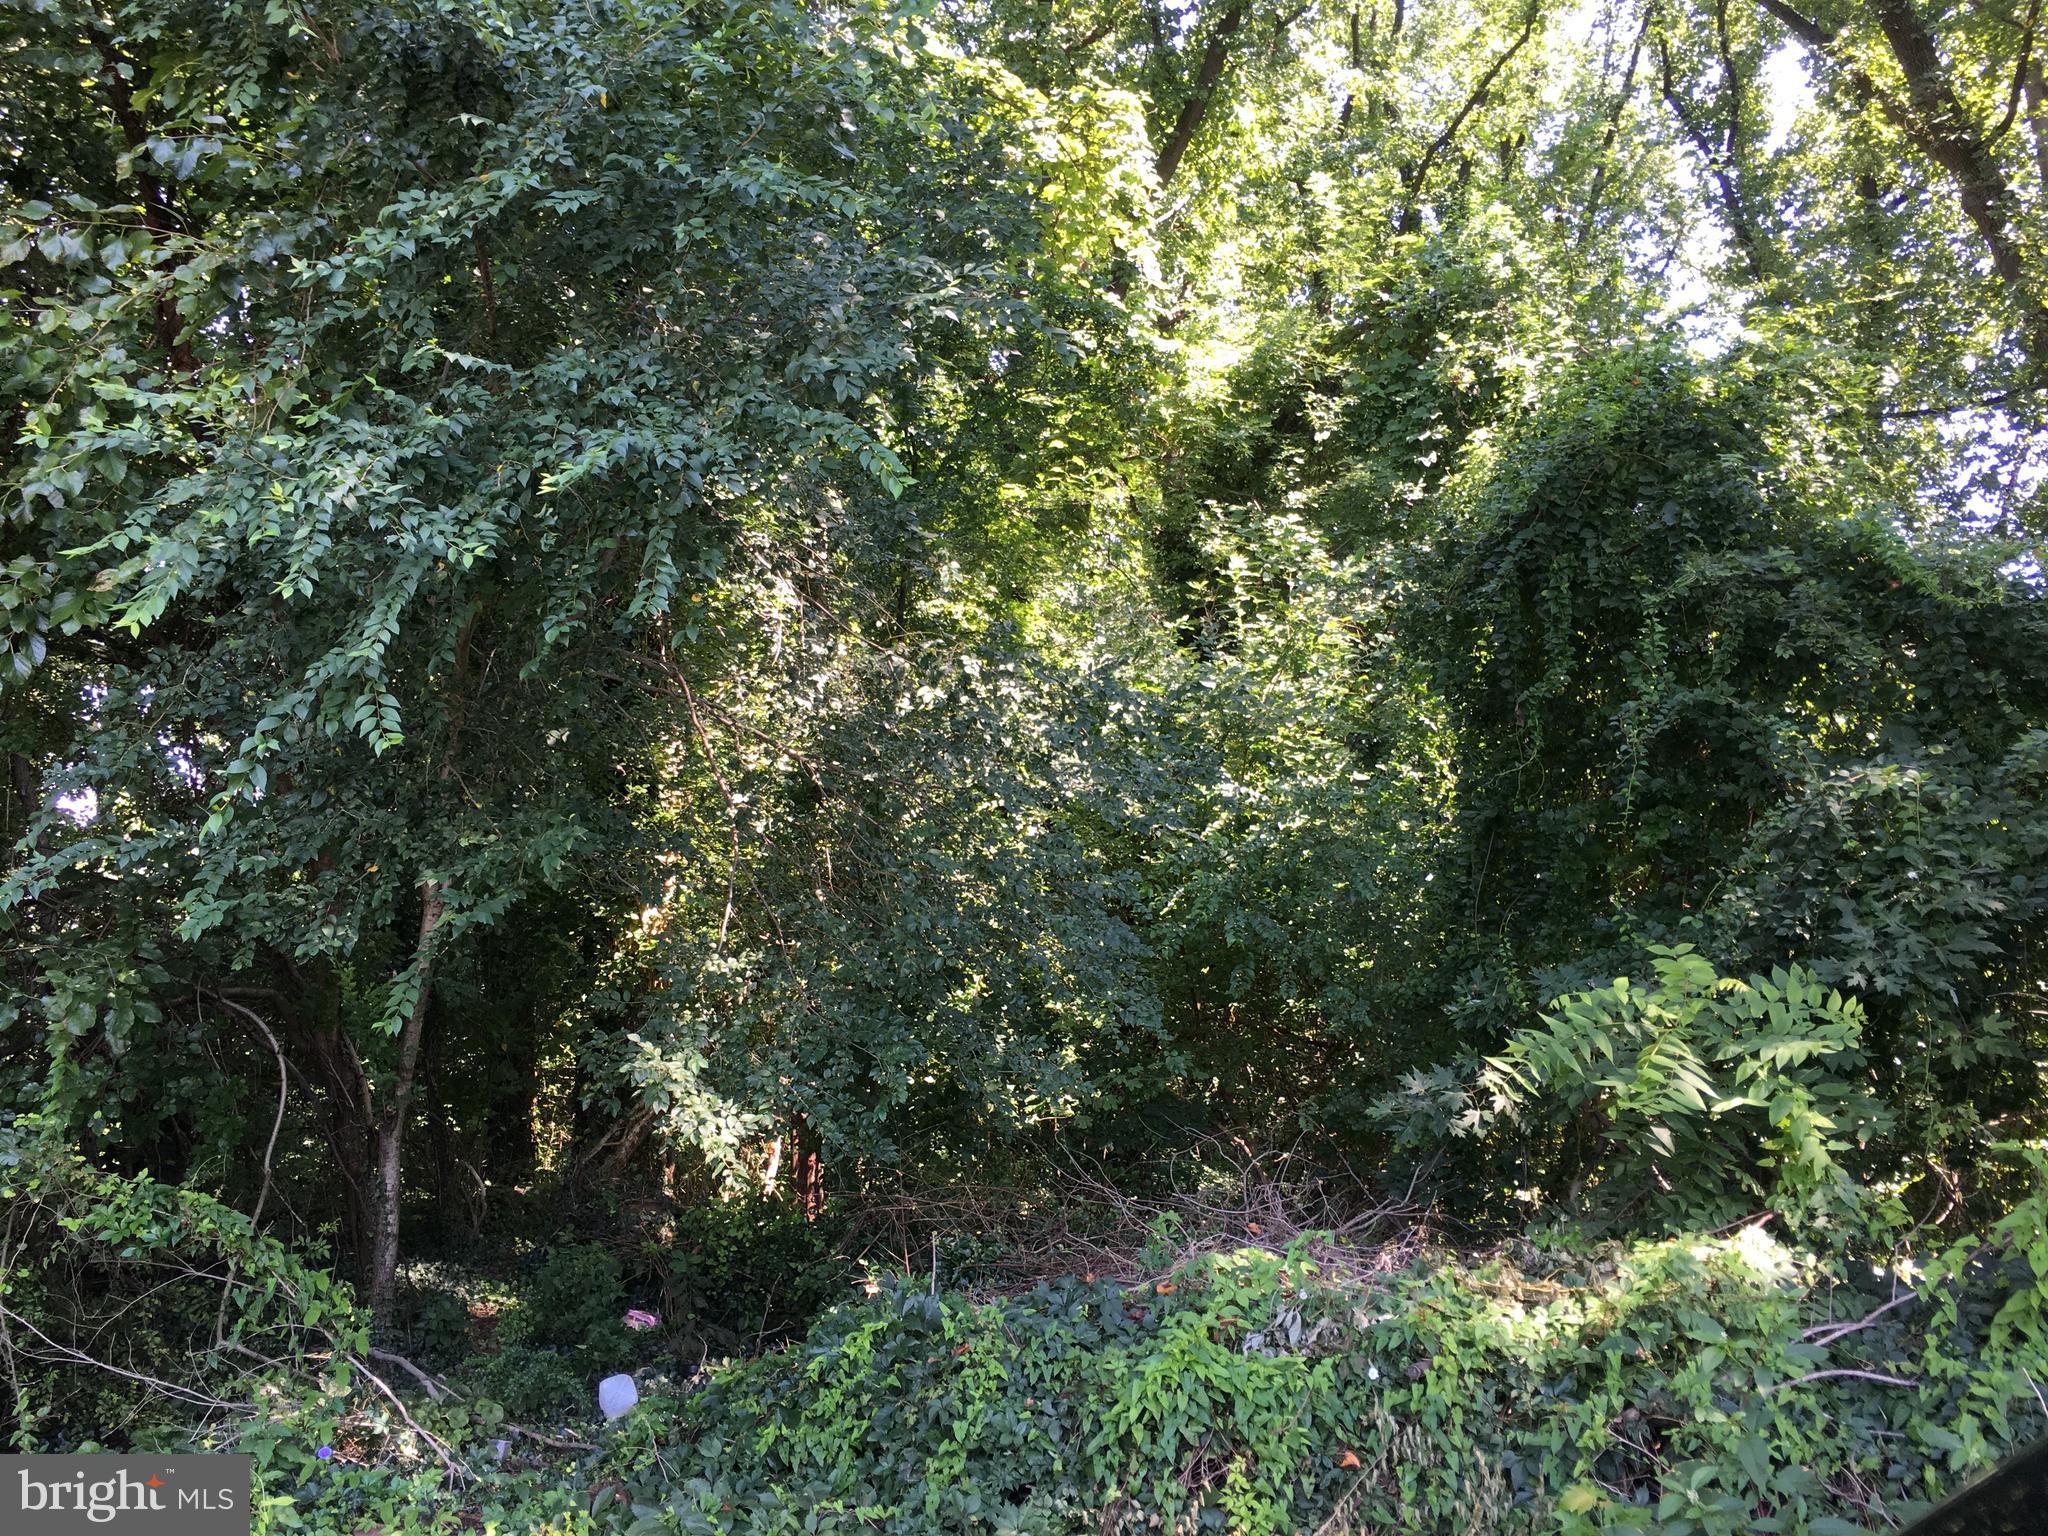 a view of a forest with plants and trees